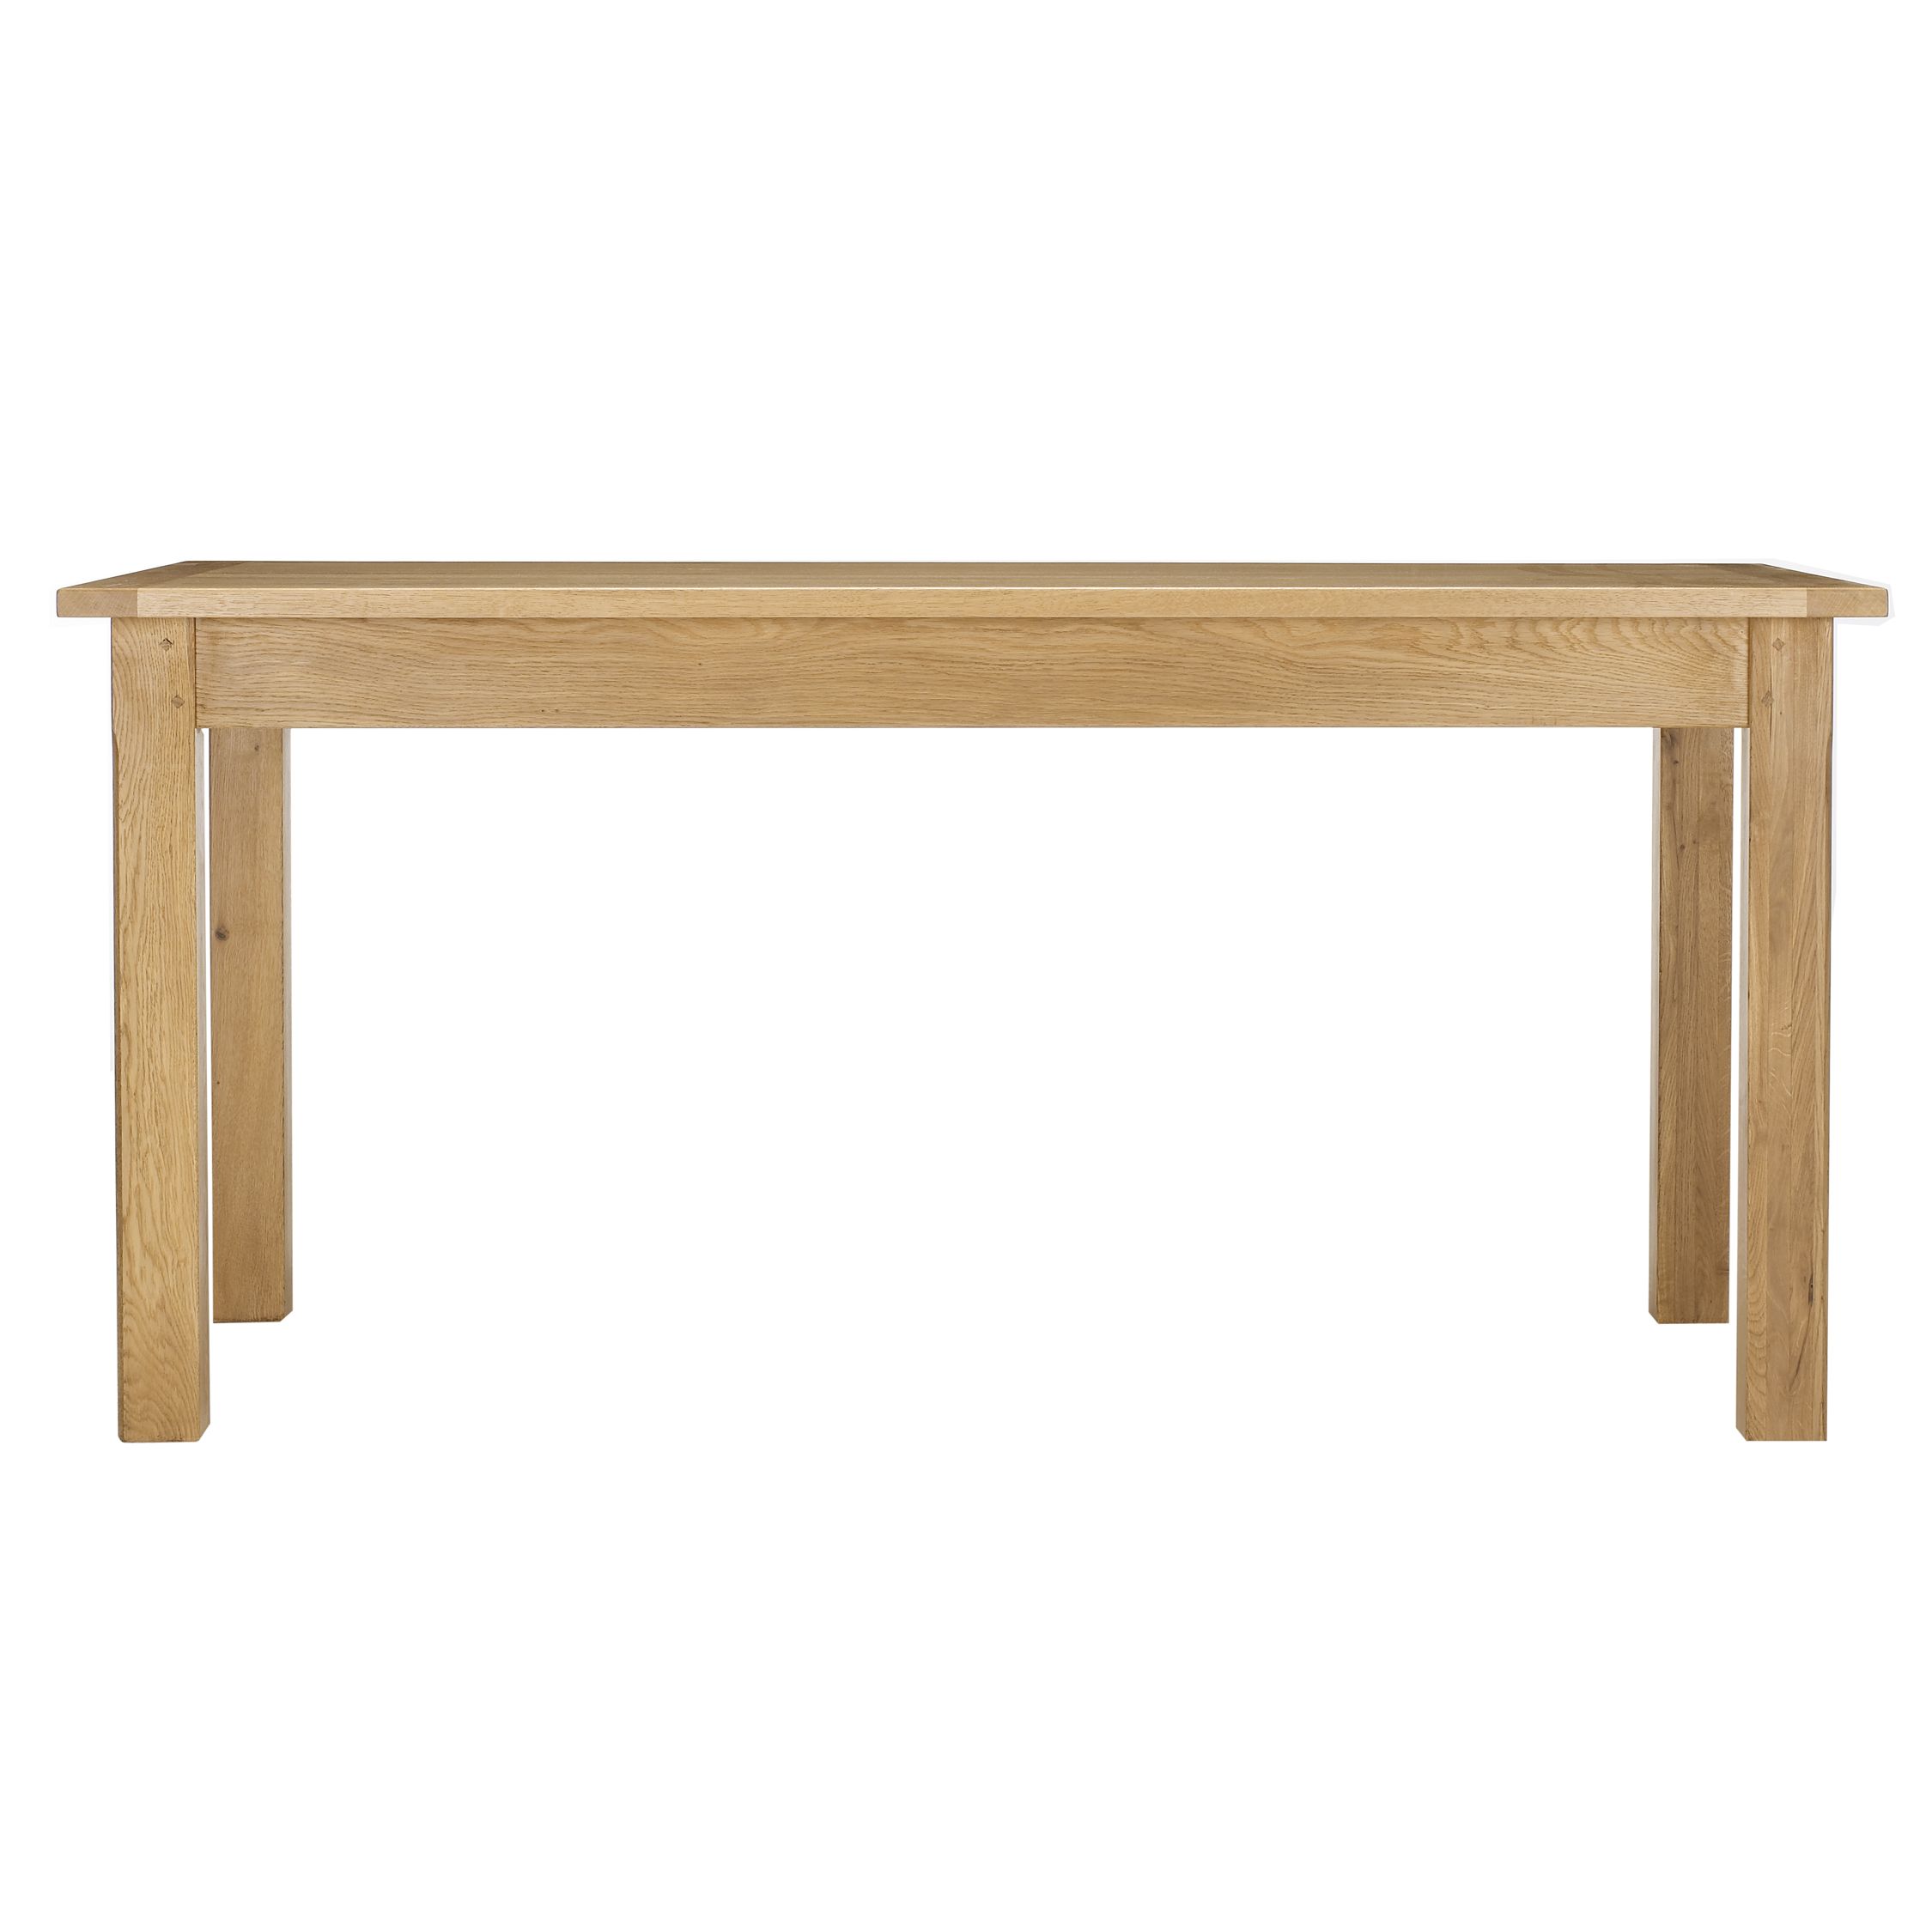 John Lewis Ardennes Small Dining Table, Sarlat